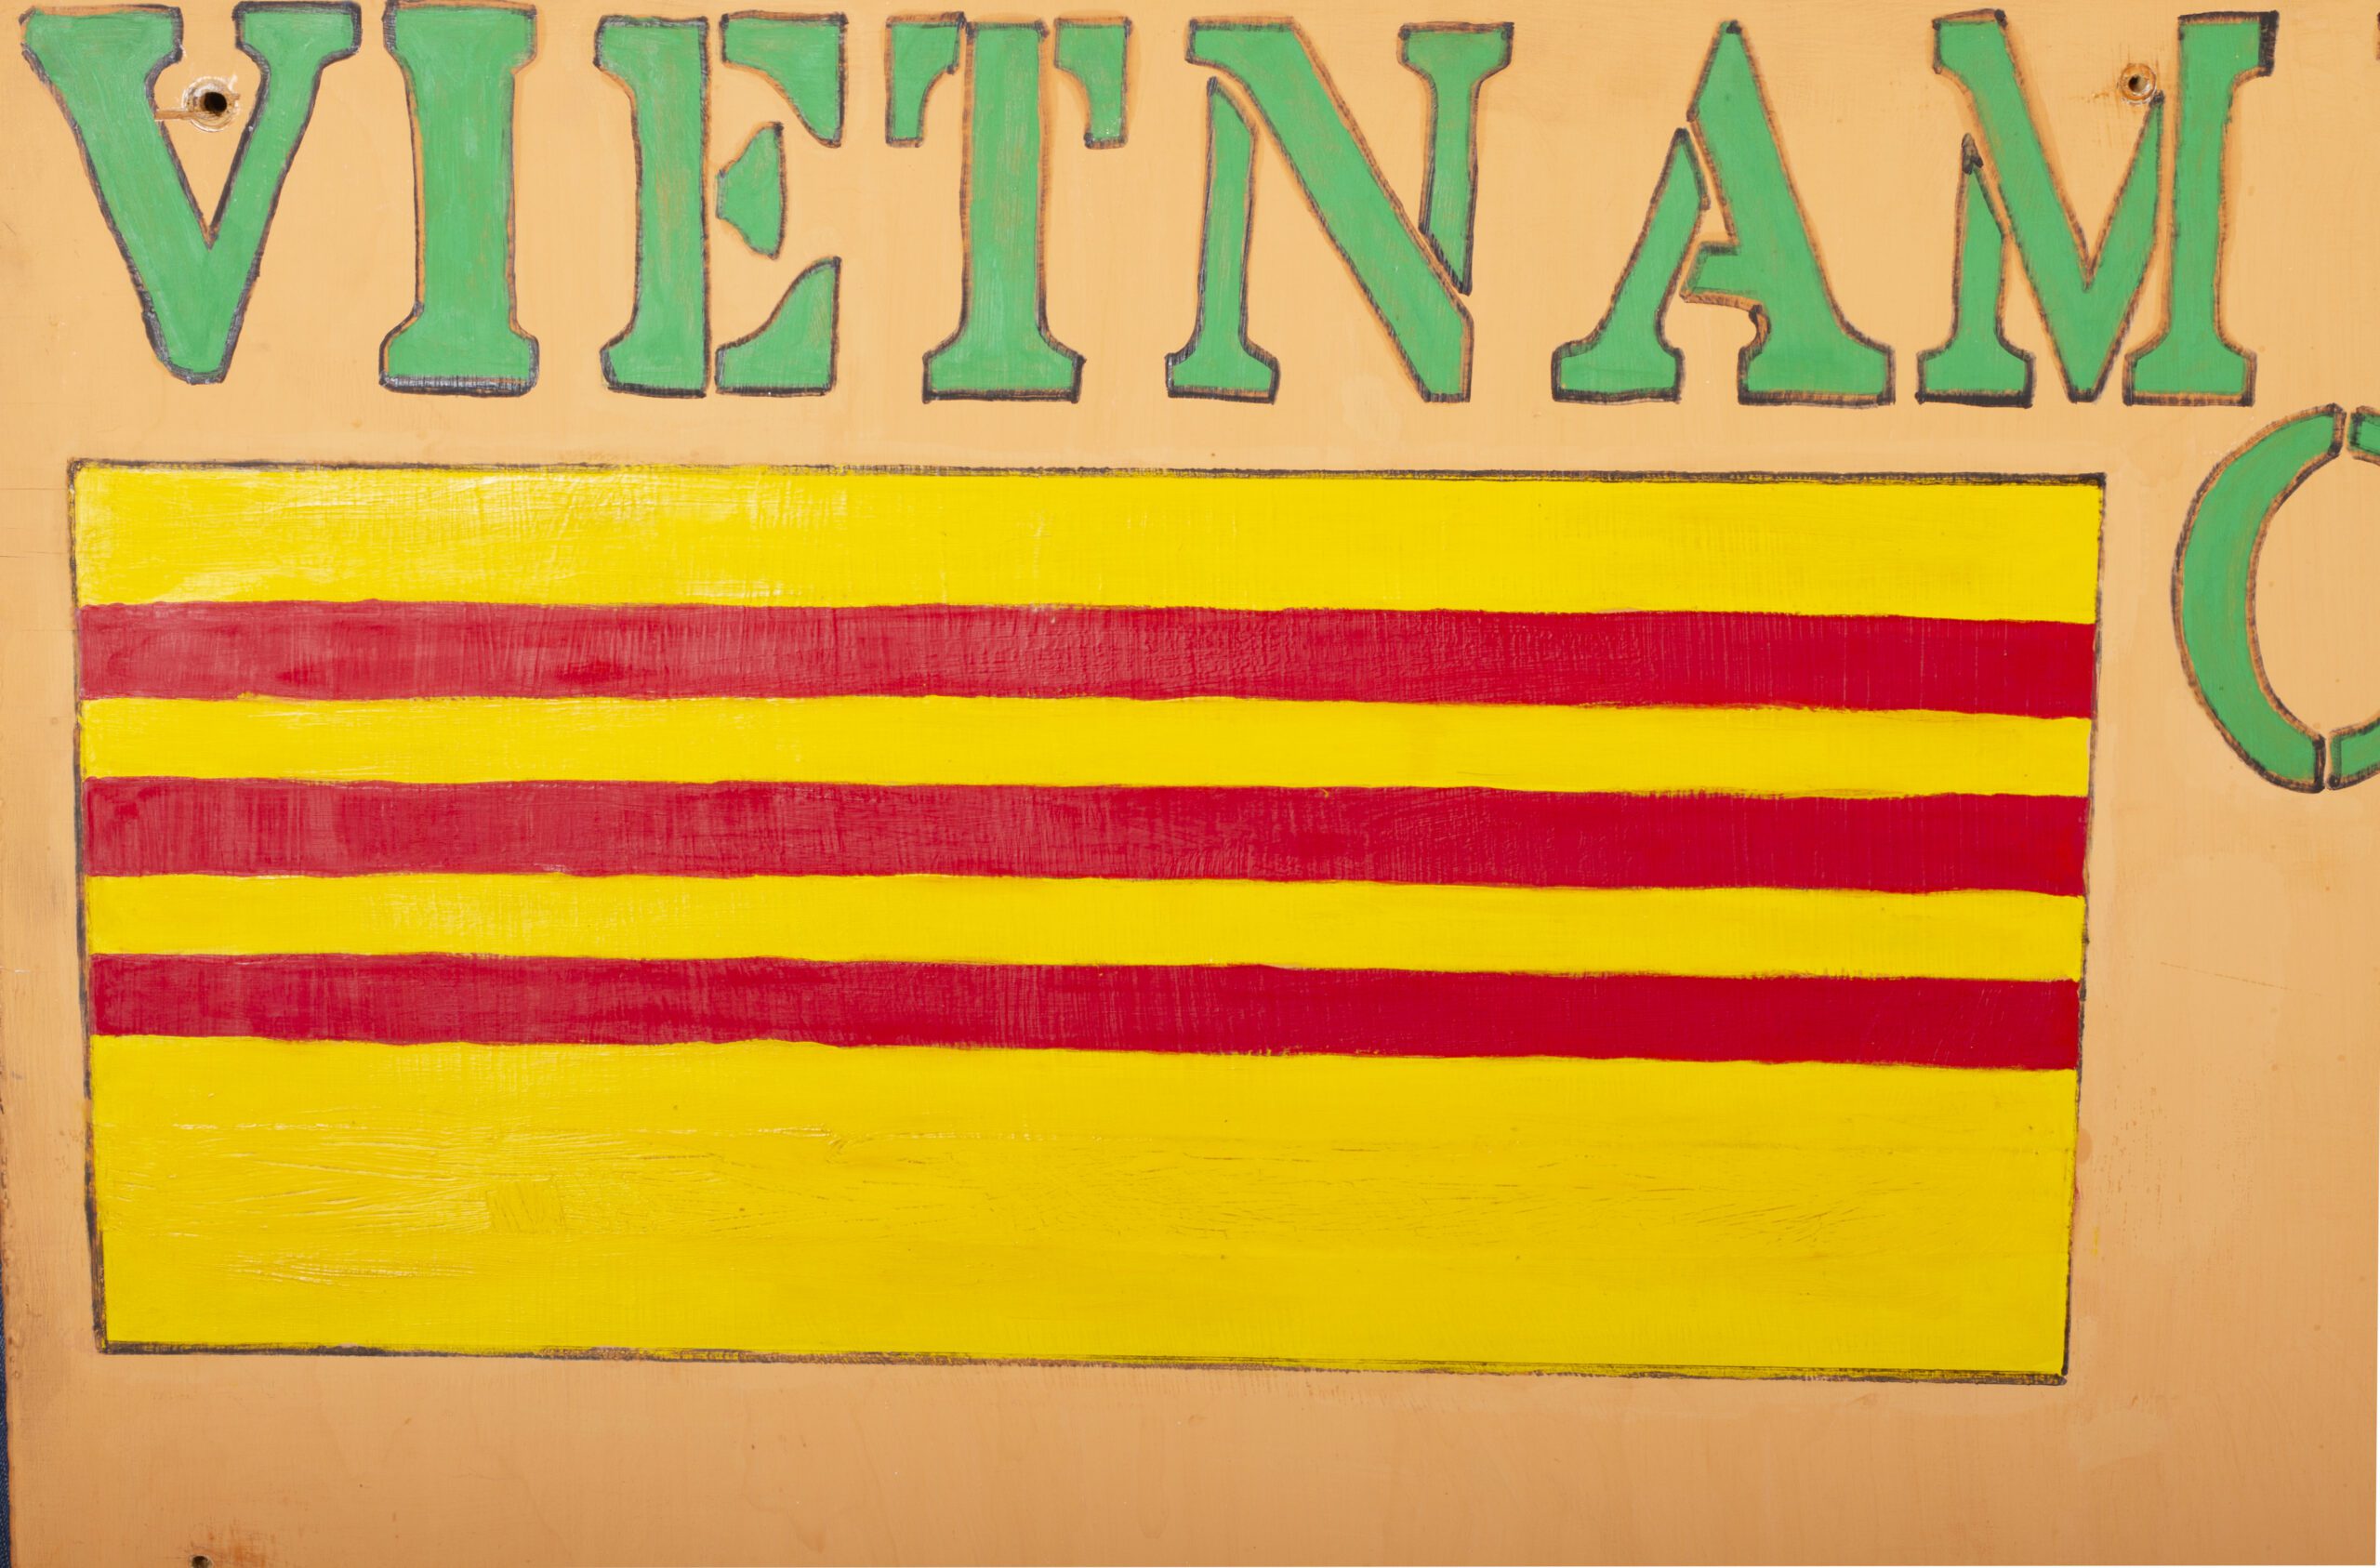 Detail of painting on plywood by Harry Edwards depicting "Vietnam" in green on a yellow background with the Vietnam flag beneath